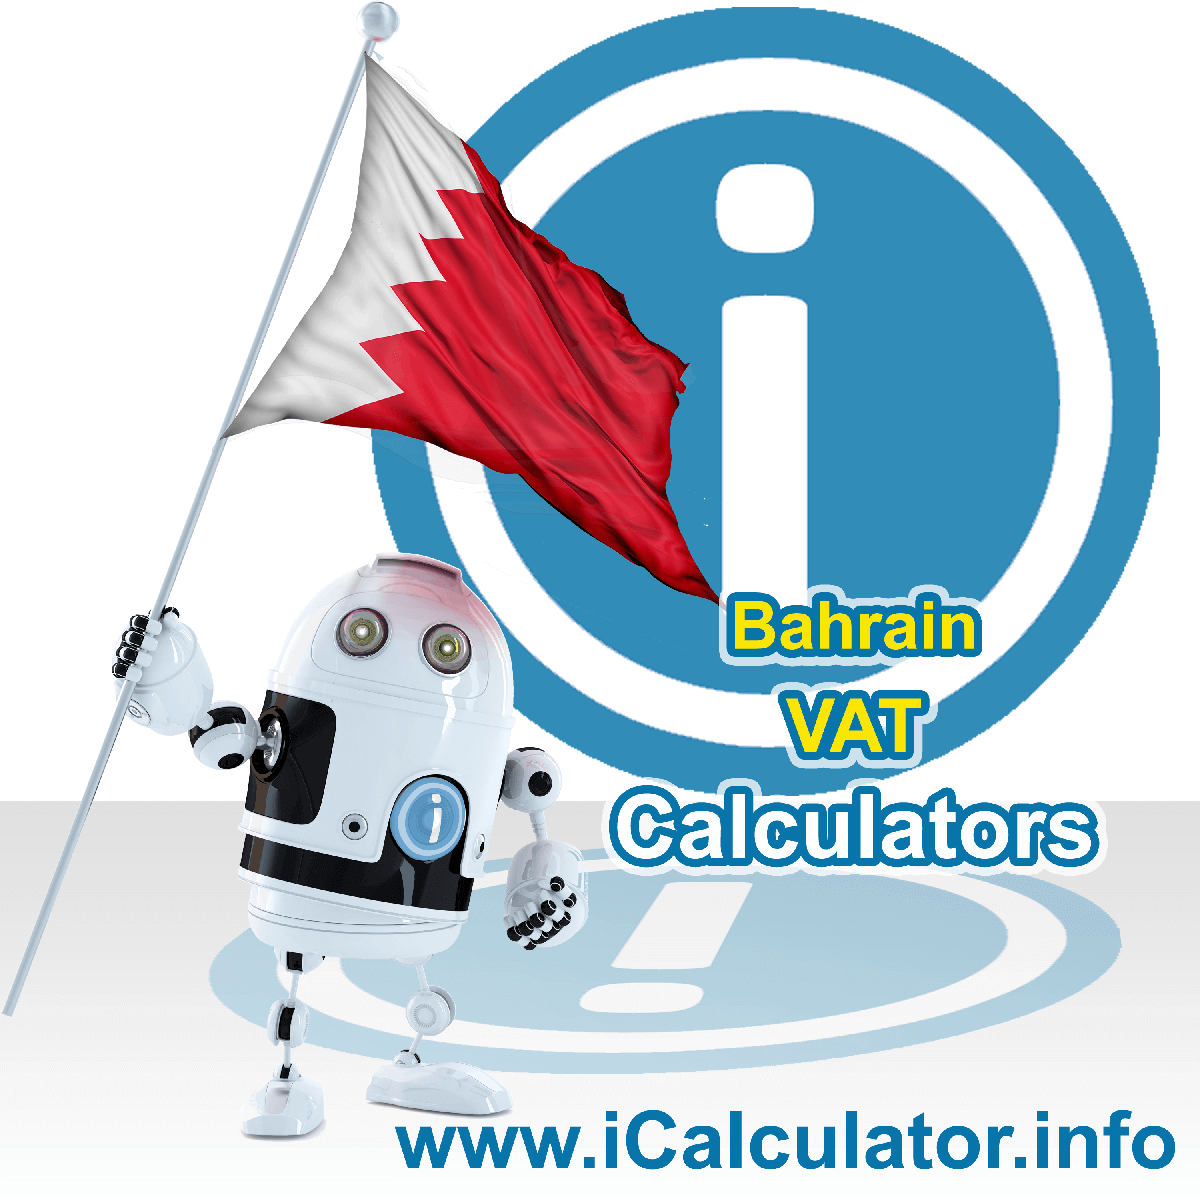 Bahrain VAT Calculator. This image shows the Bahrain flag and information relating to the VAT formula used for calculating Value Added Tax in Bahrain using the Bahrain VAT Calculator in 2023